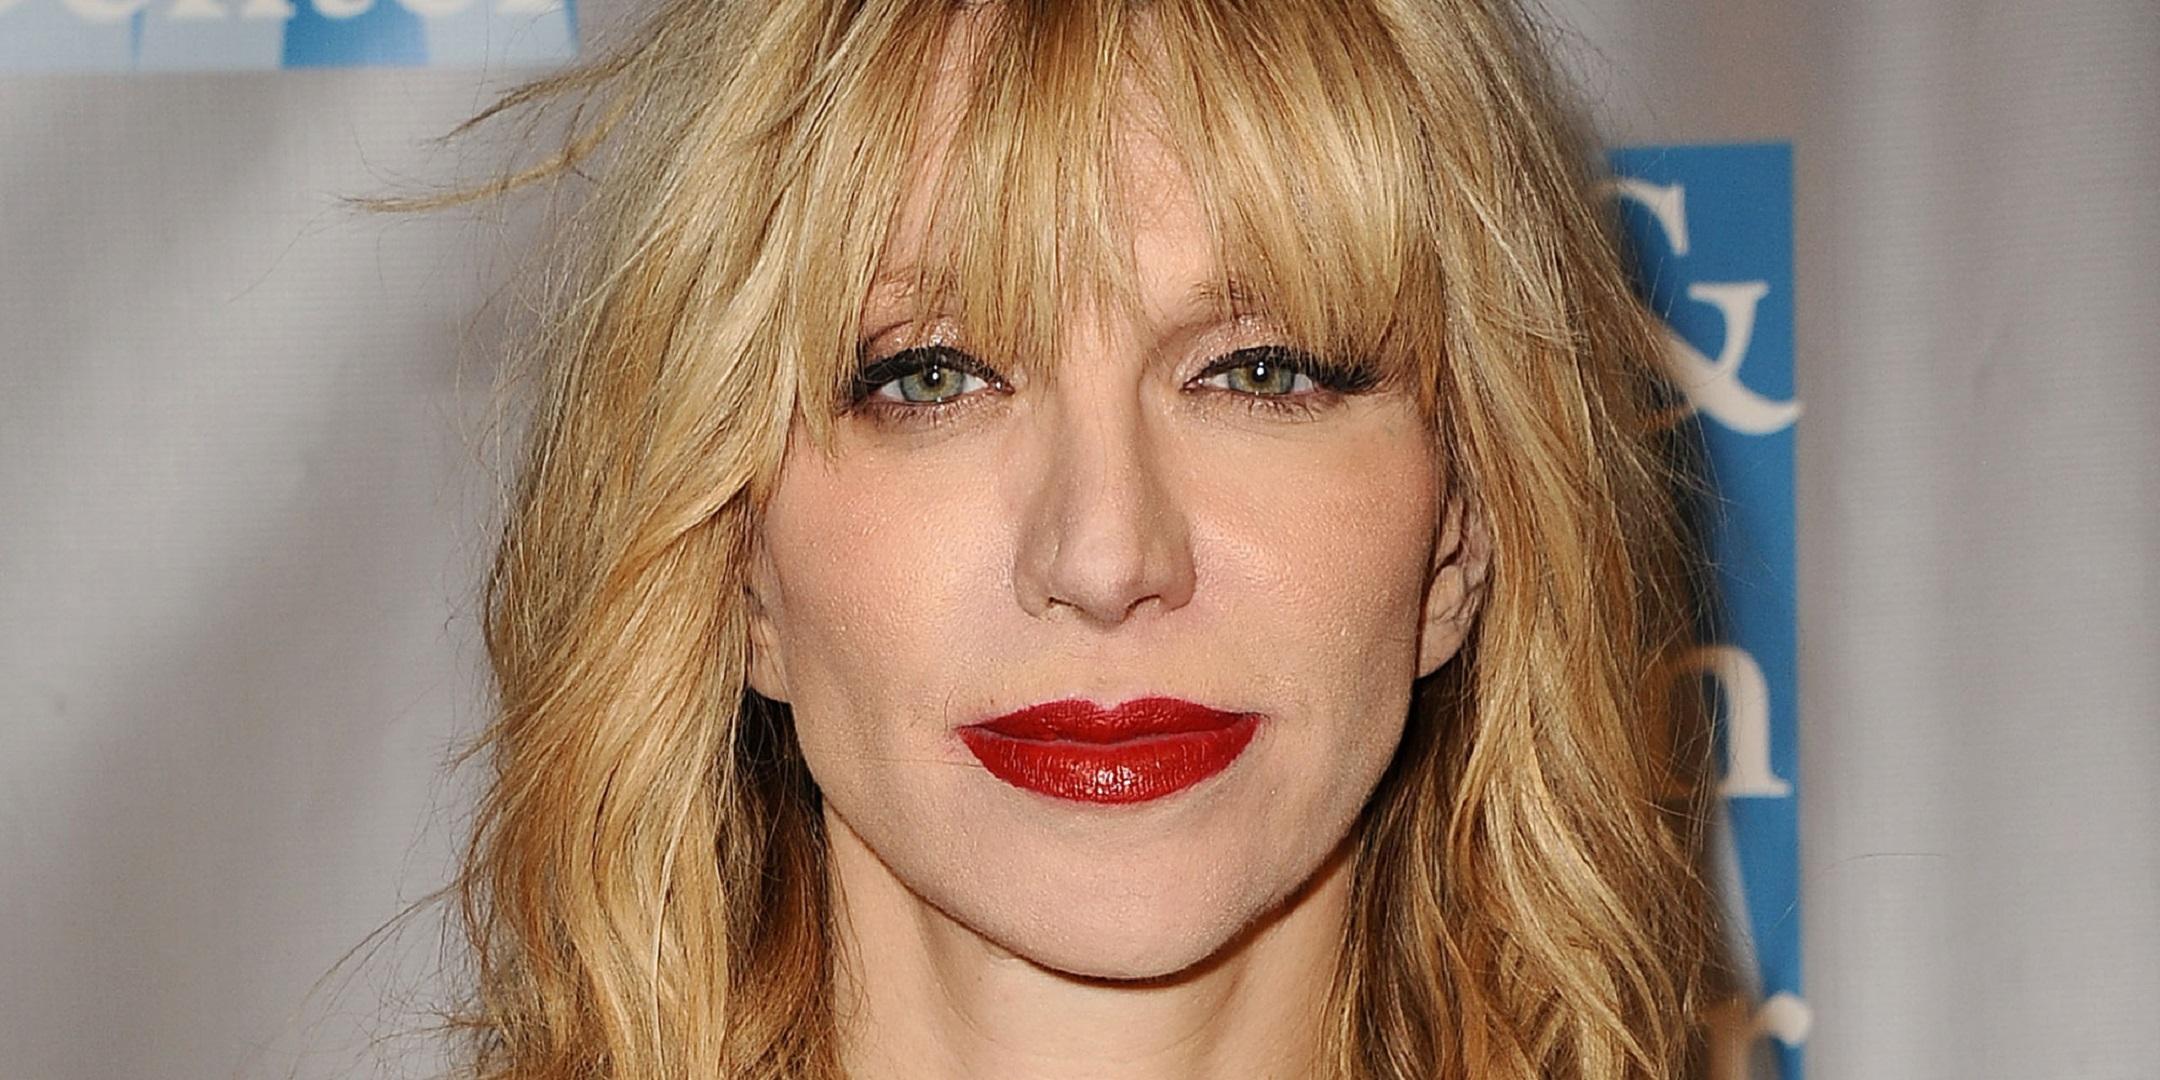 Courtney Love Wallpaper Image Photo Picture Background